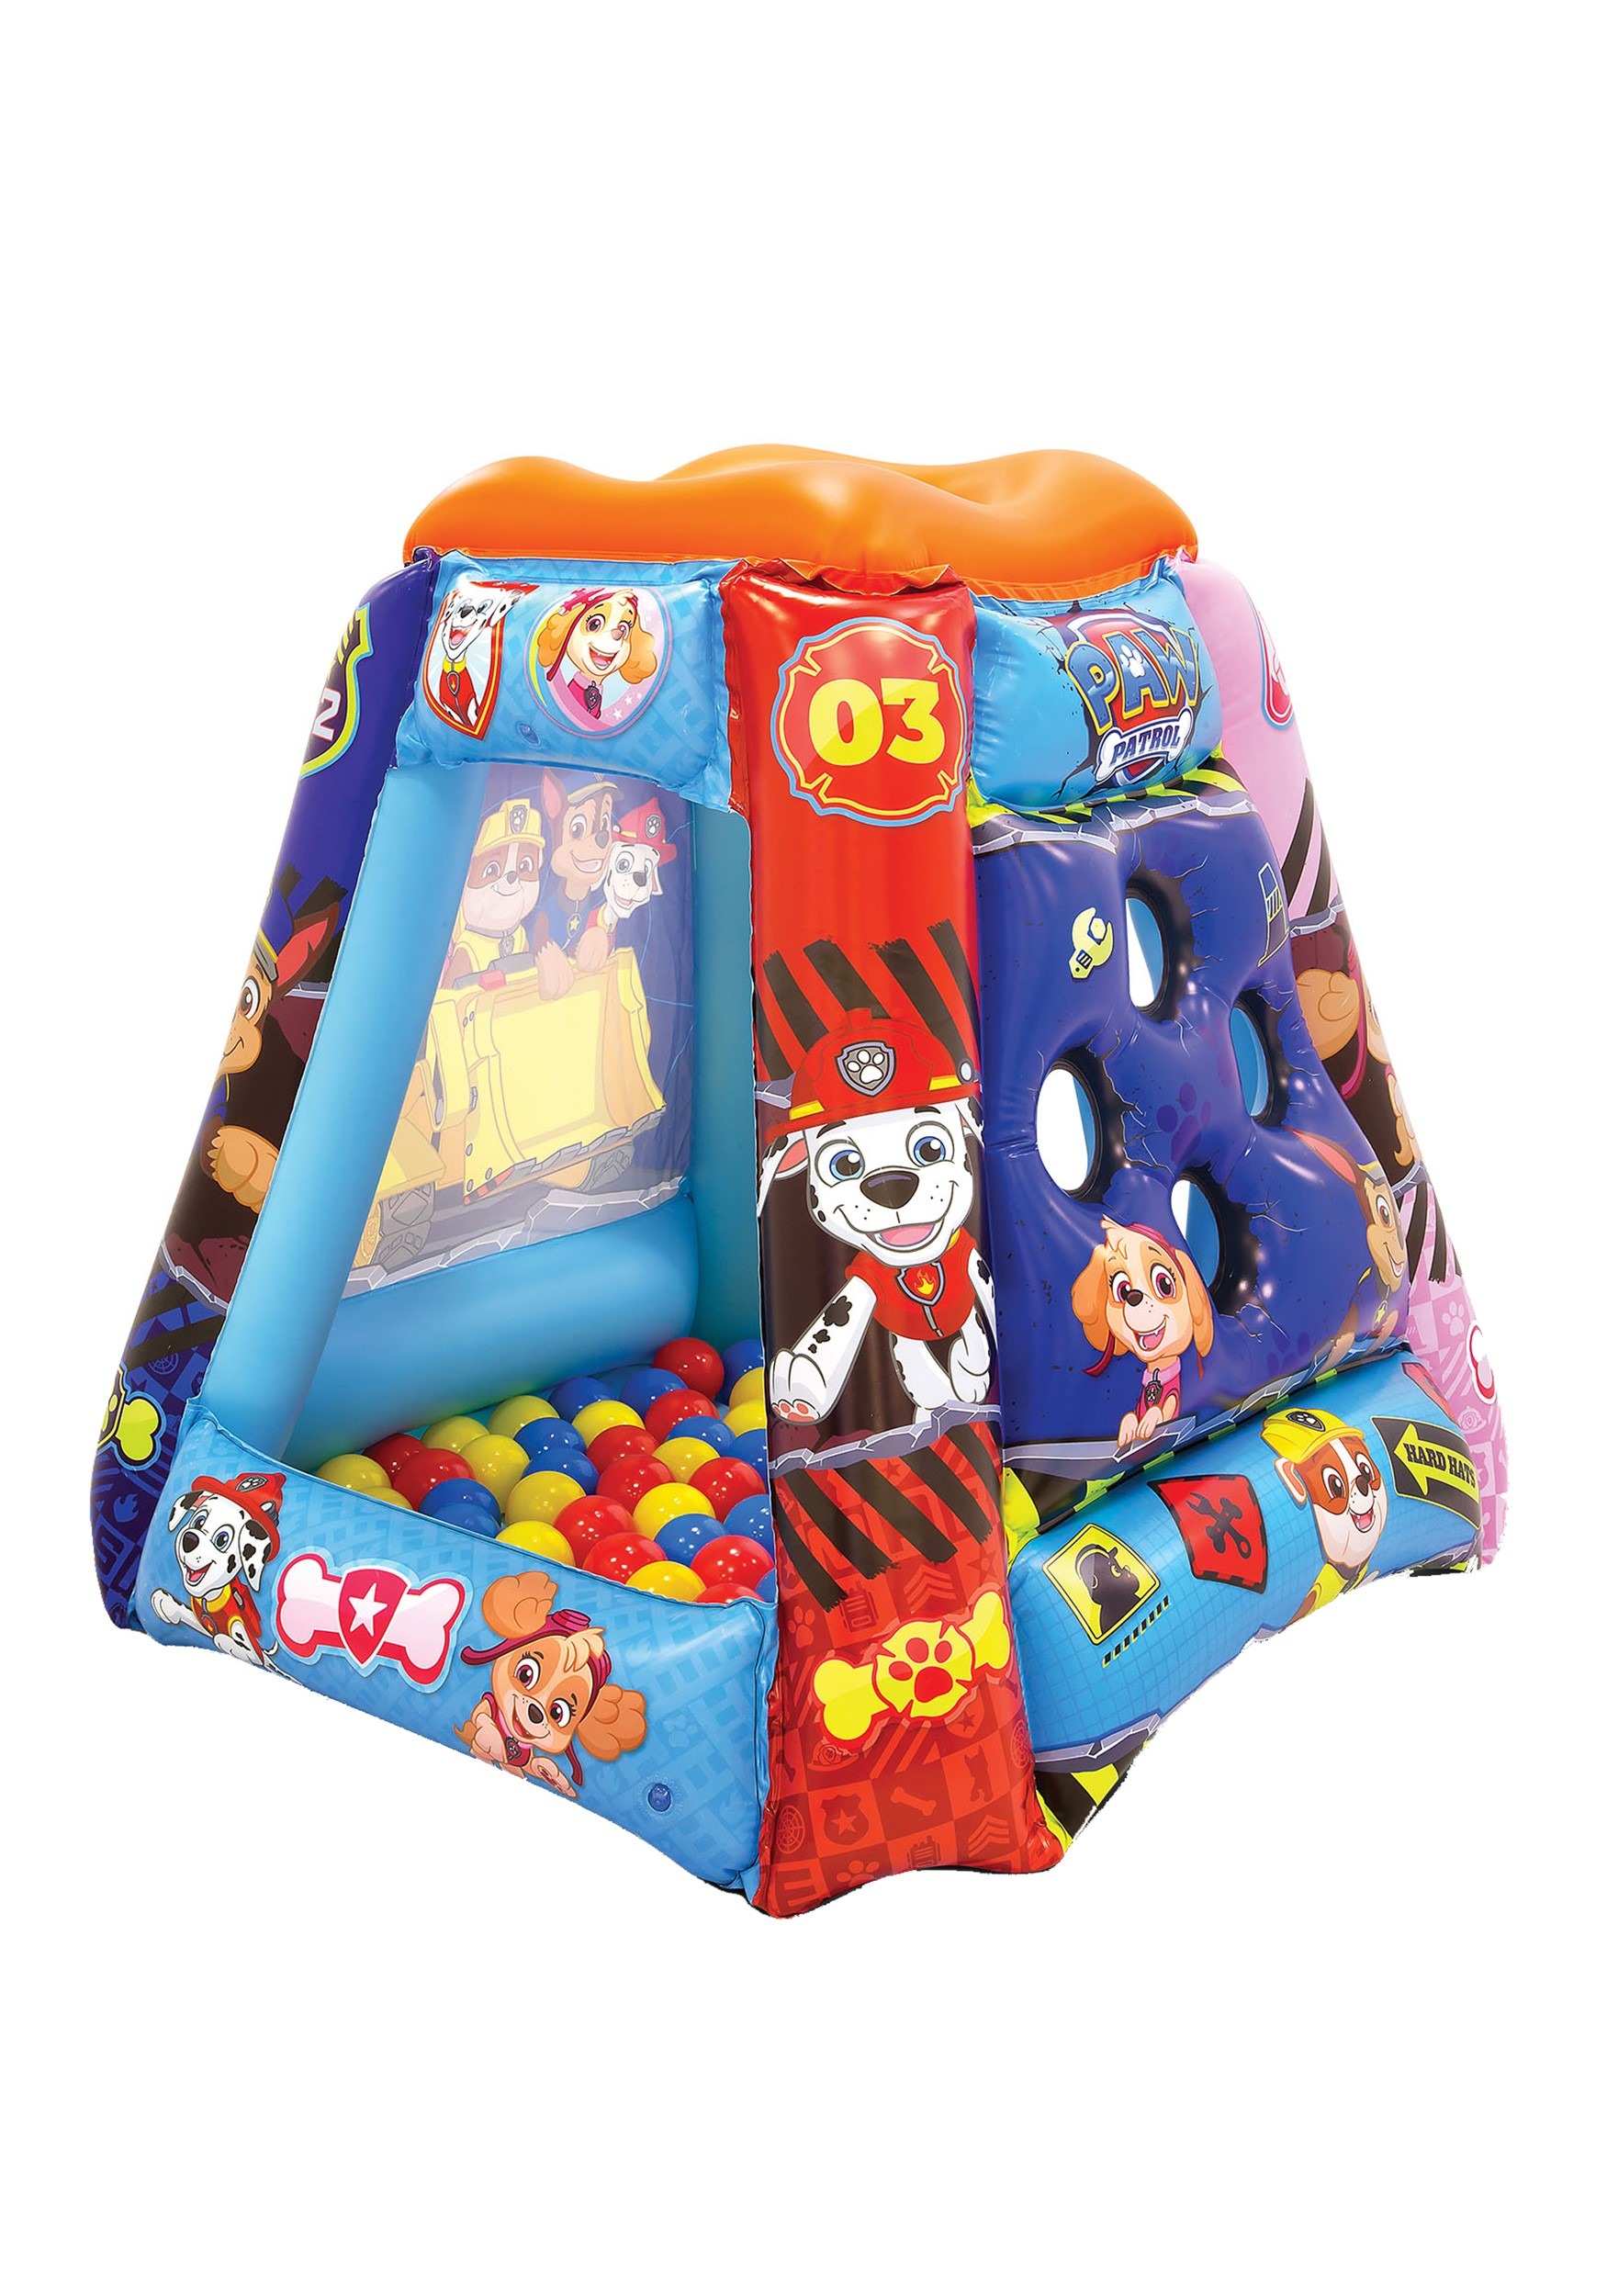 Paw Patrol Playland with 20 Balls for Kids